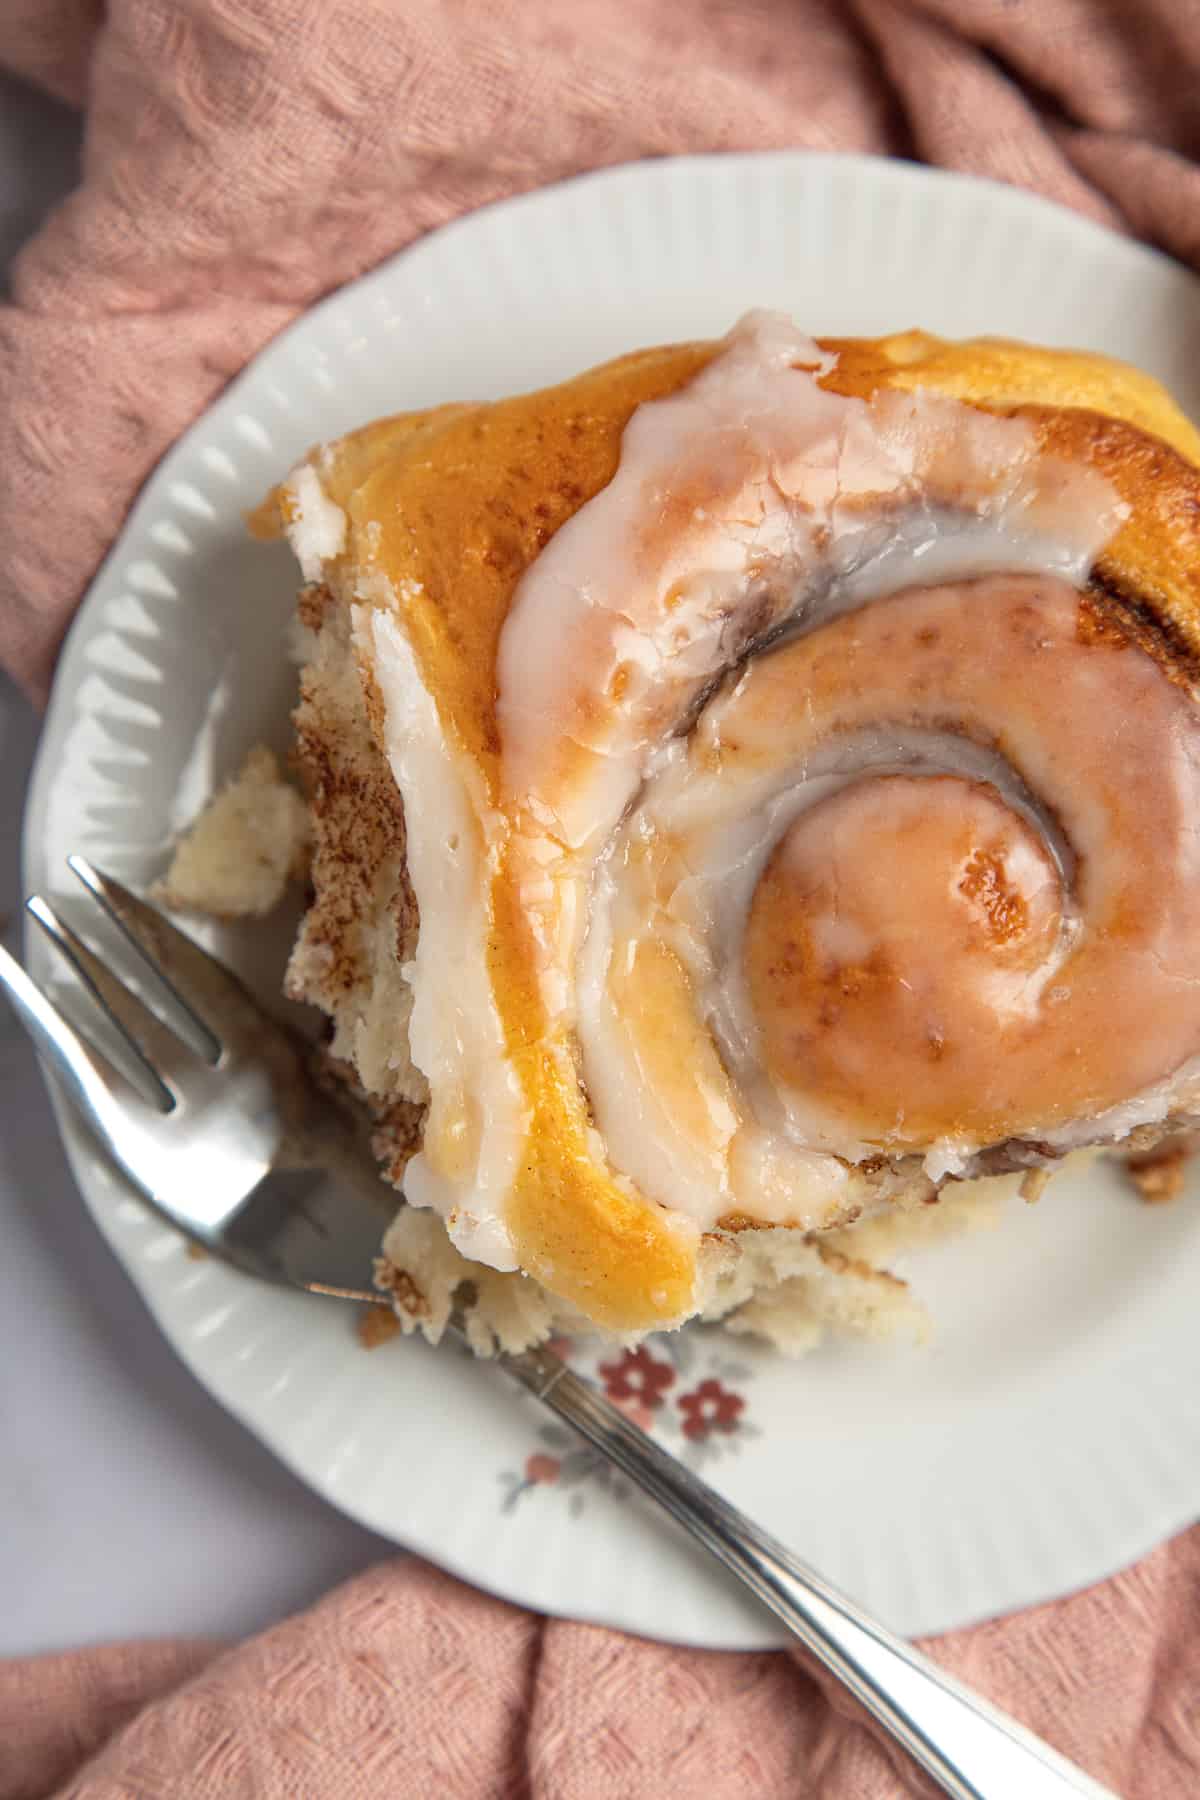 Looking down at a glazed gluten free cinnamon roll on a plate with a fork on top of a pink cloth napkin.